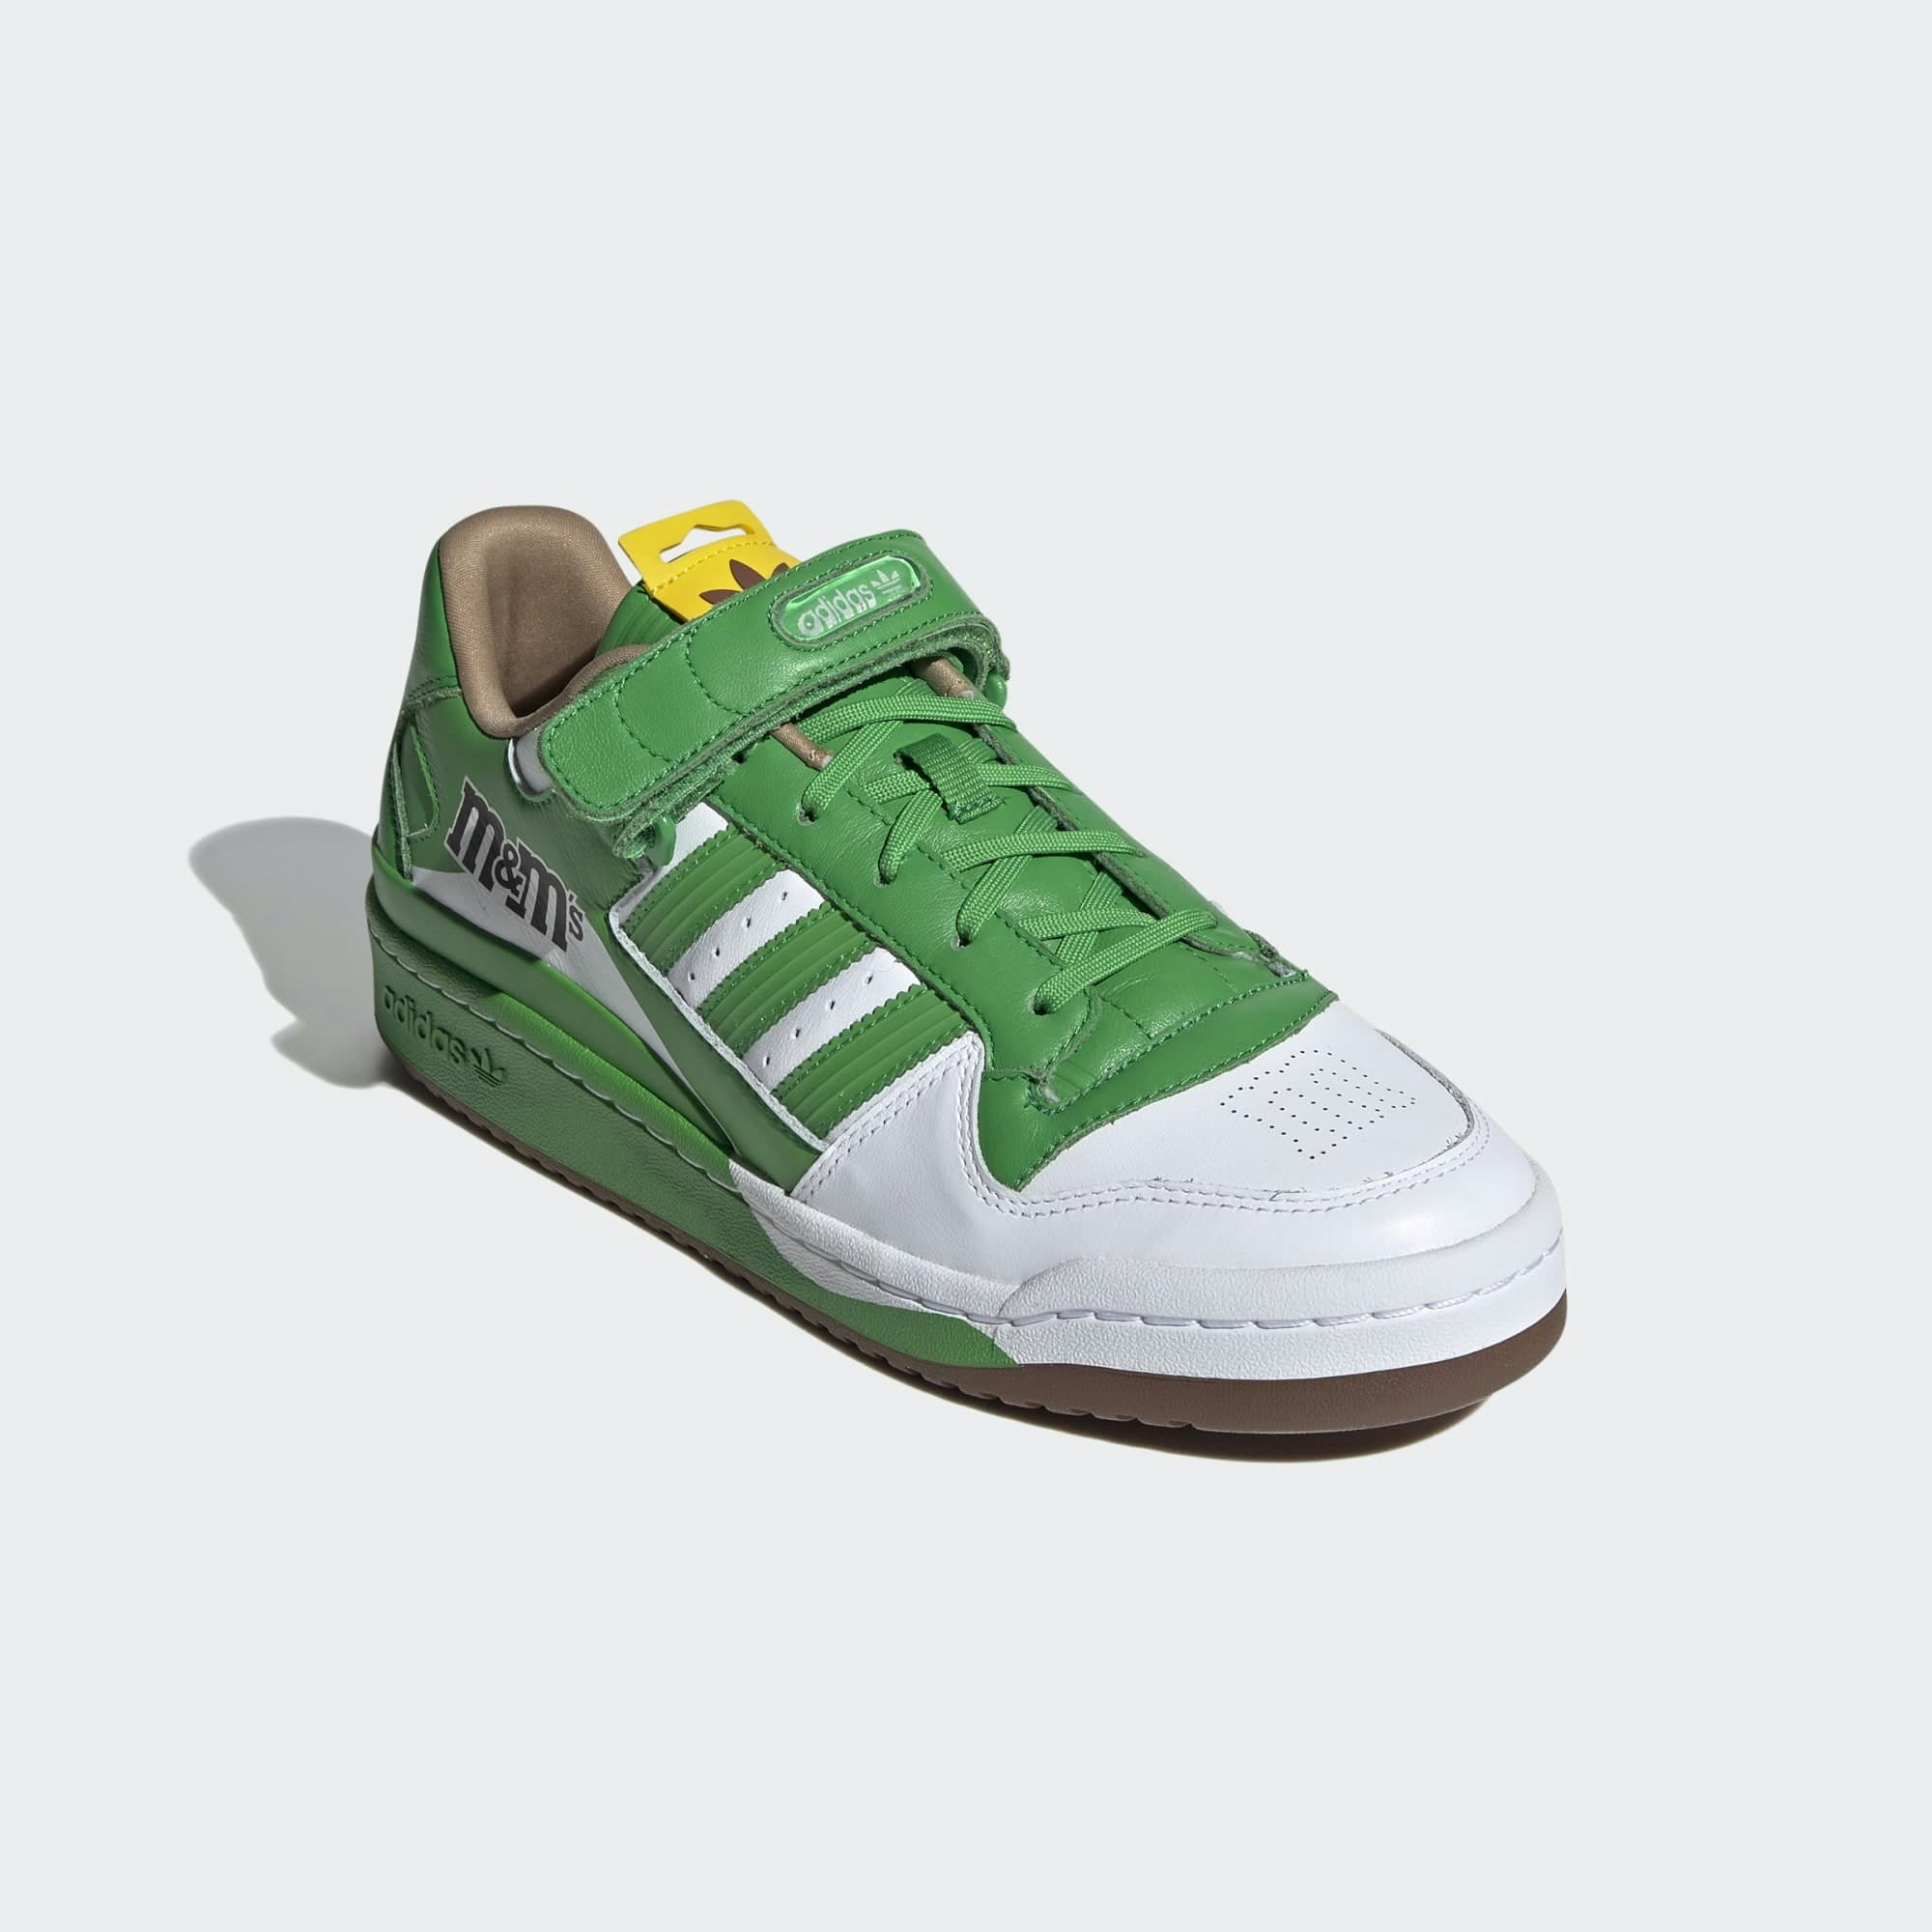 M&M’s x adidas Forum Low "Lucky Green"